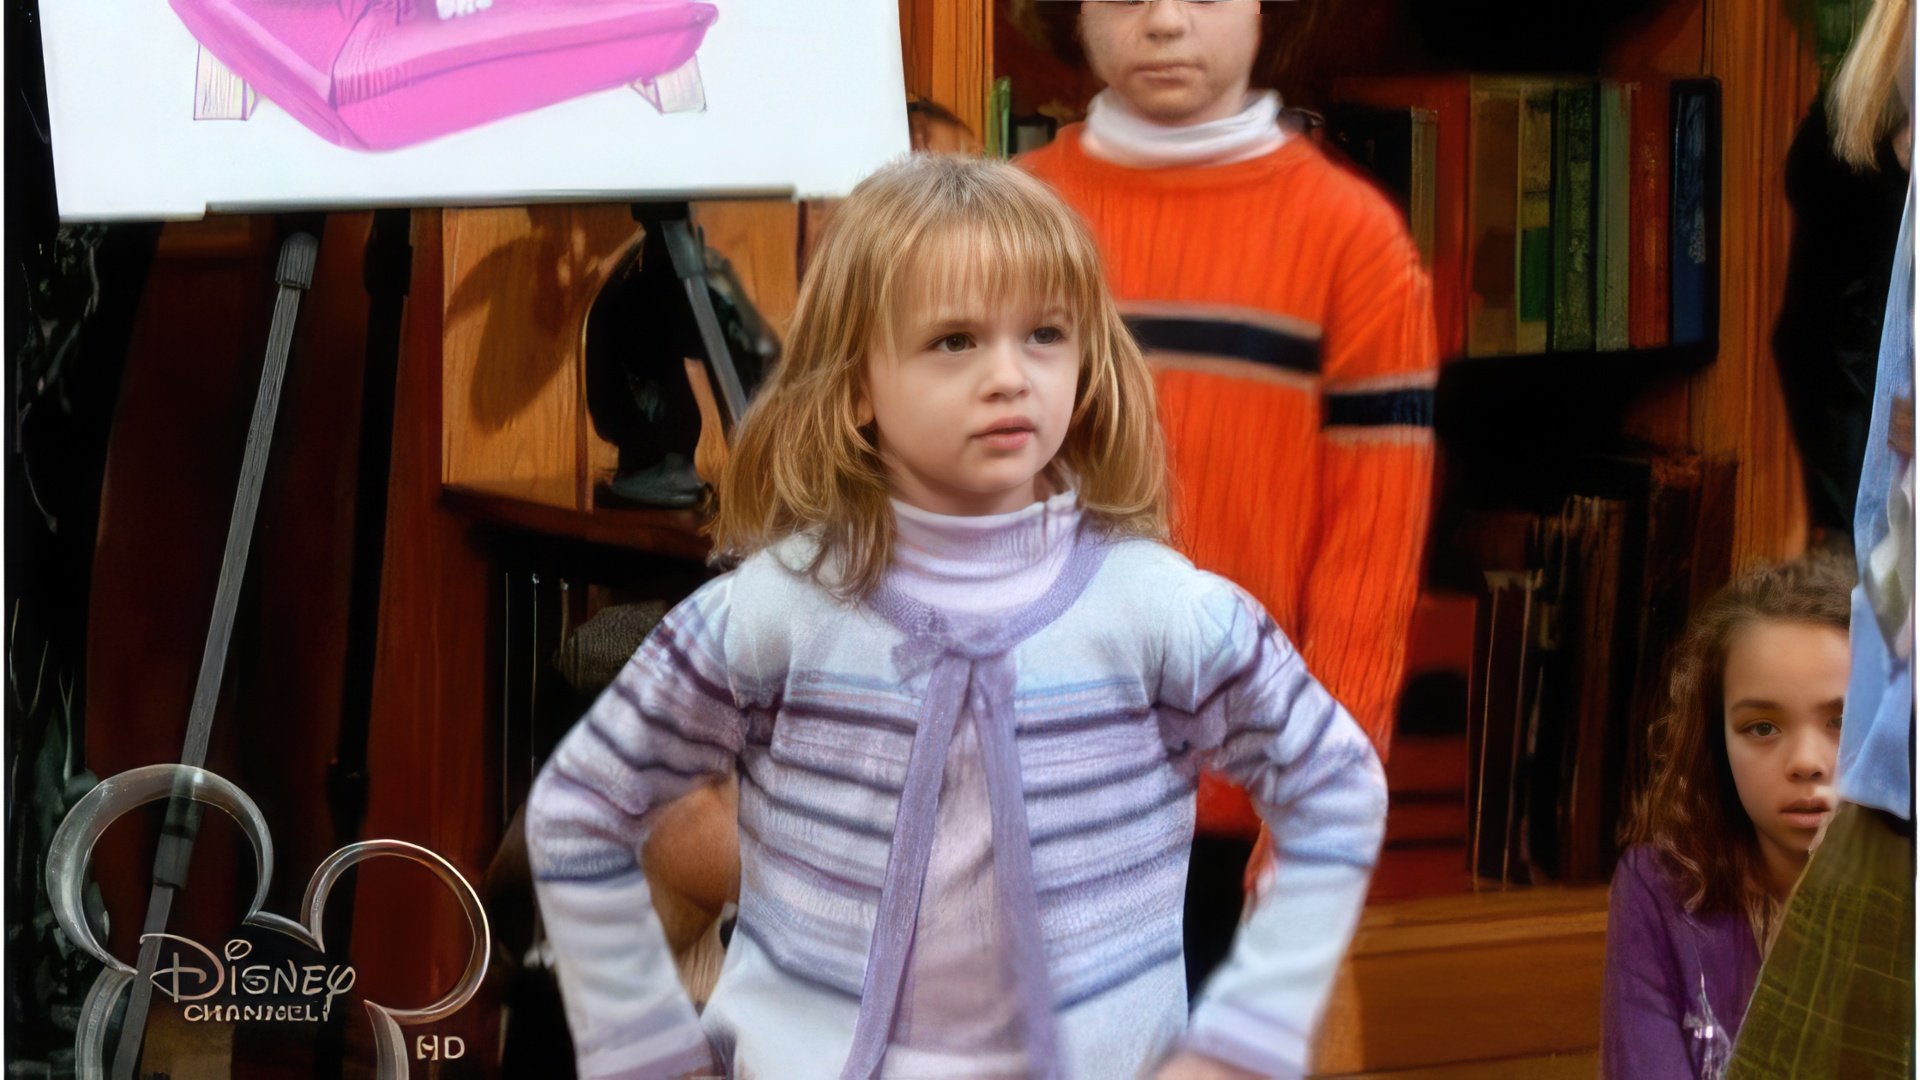 Joey King in “The Suite Life of Zack & Cody”